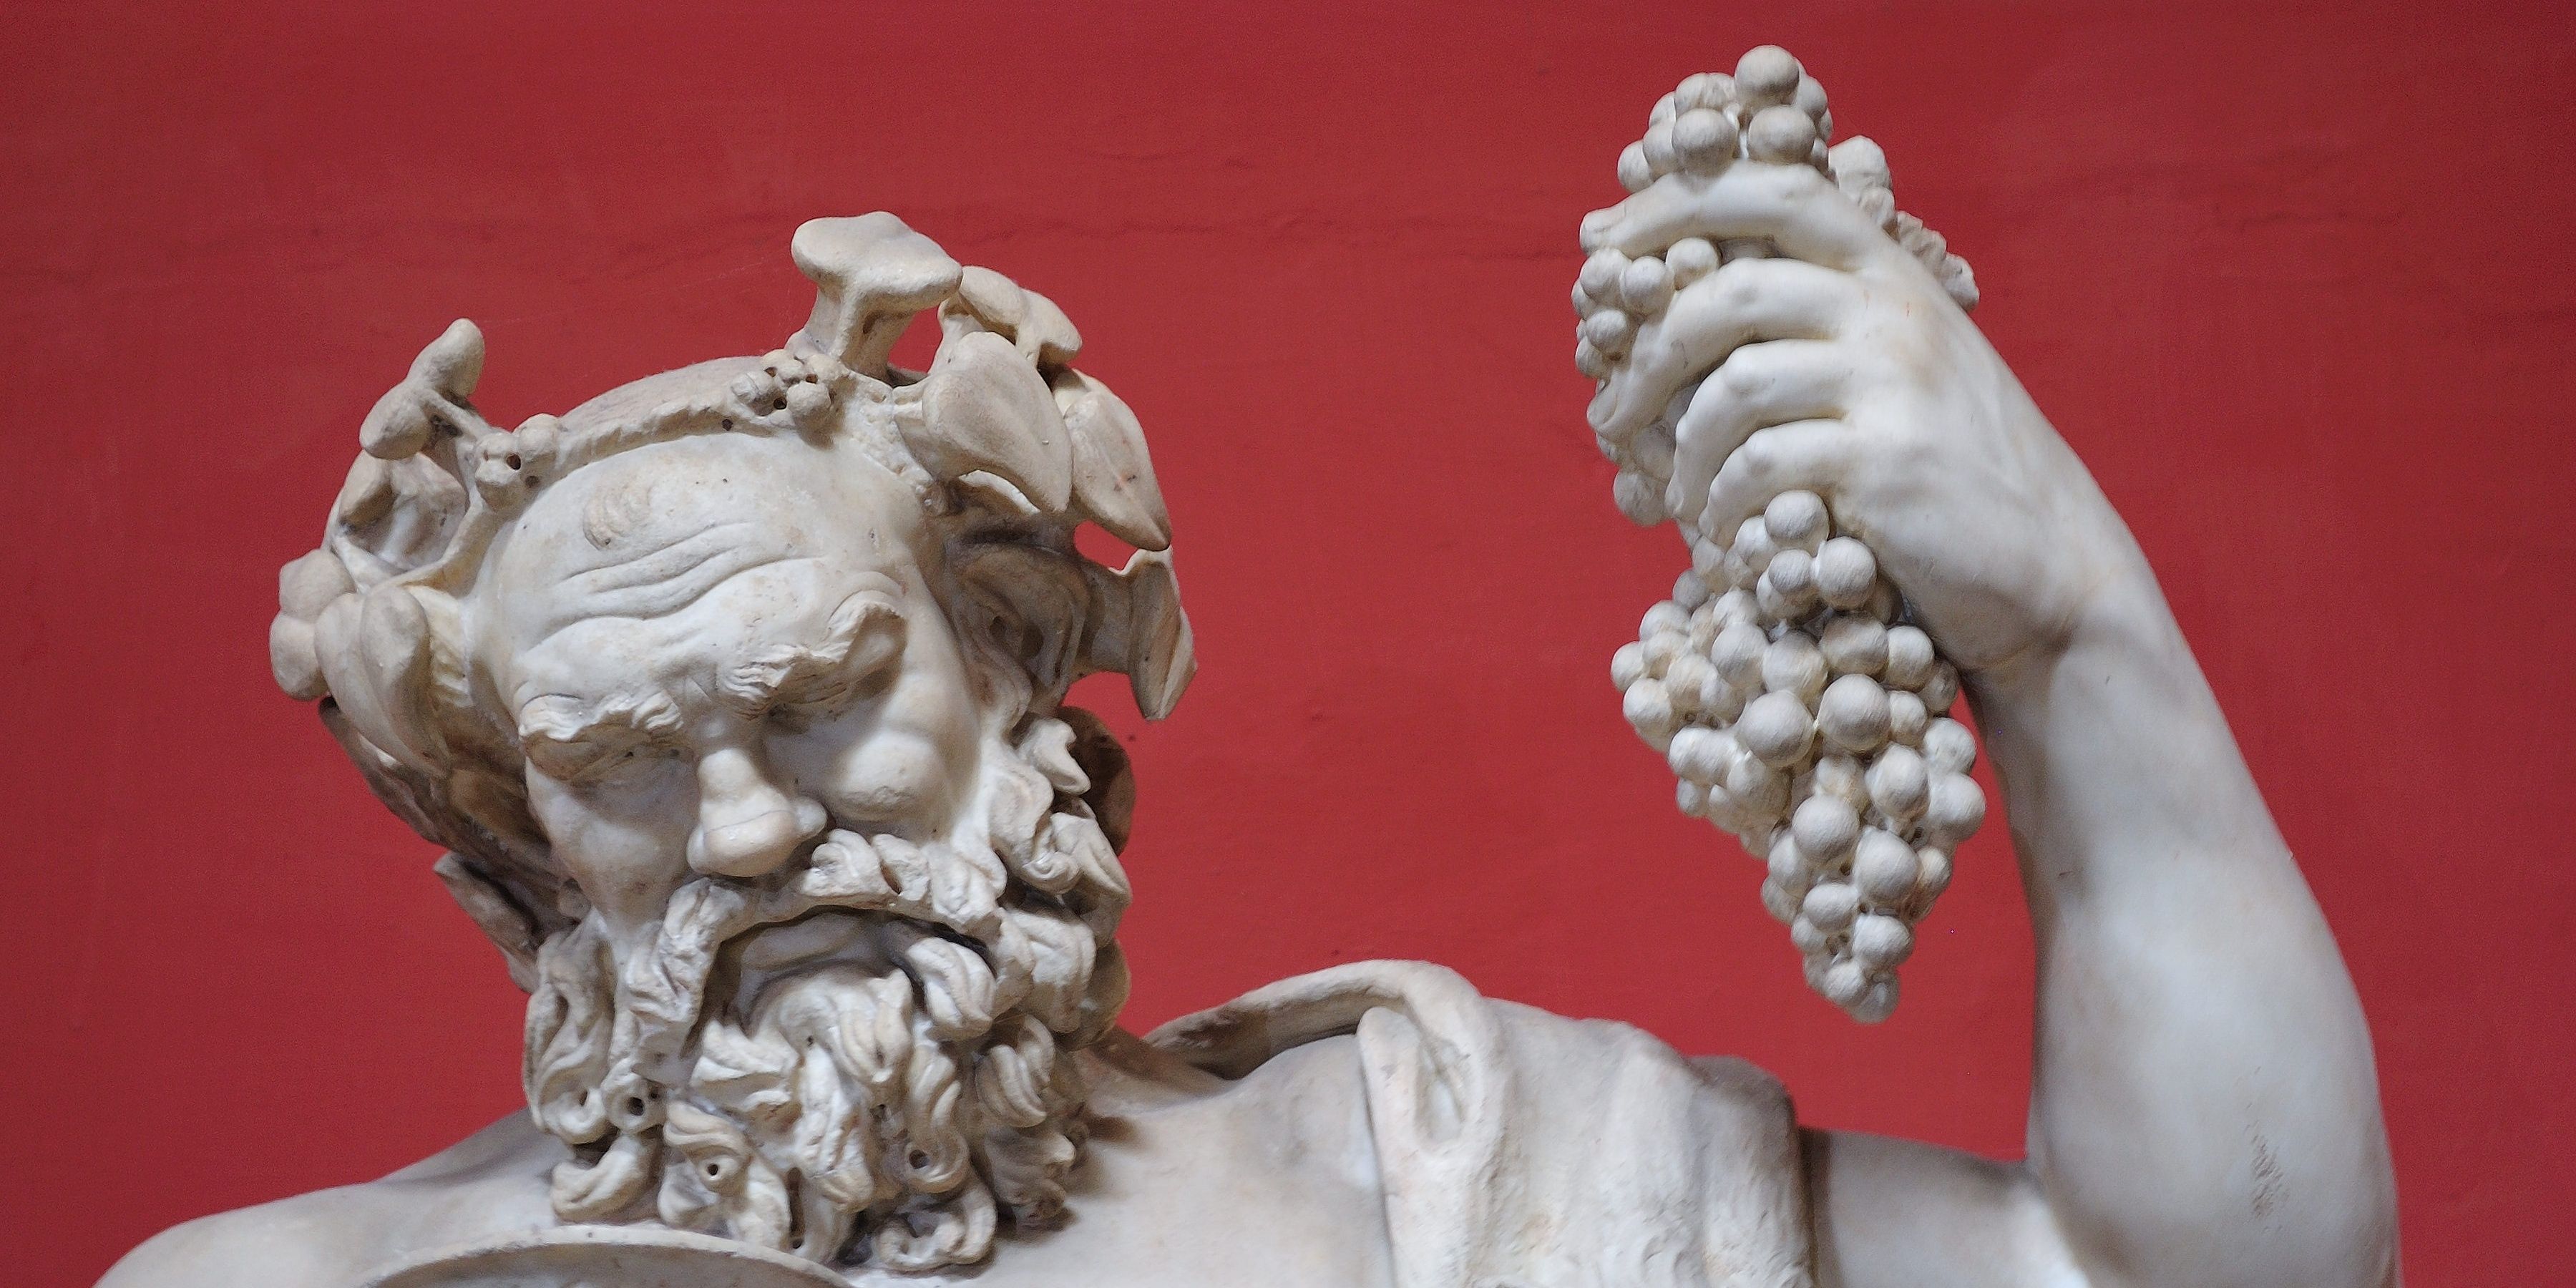 A statue of Dionysus holding grapes